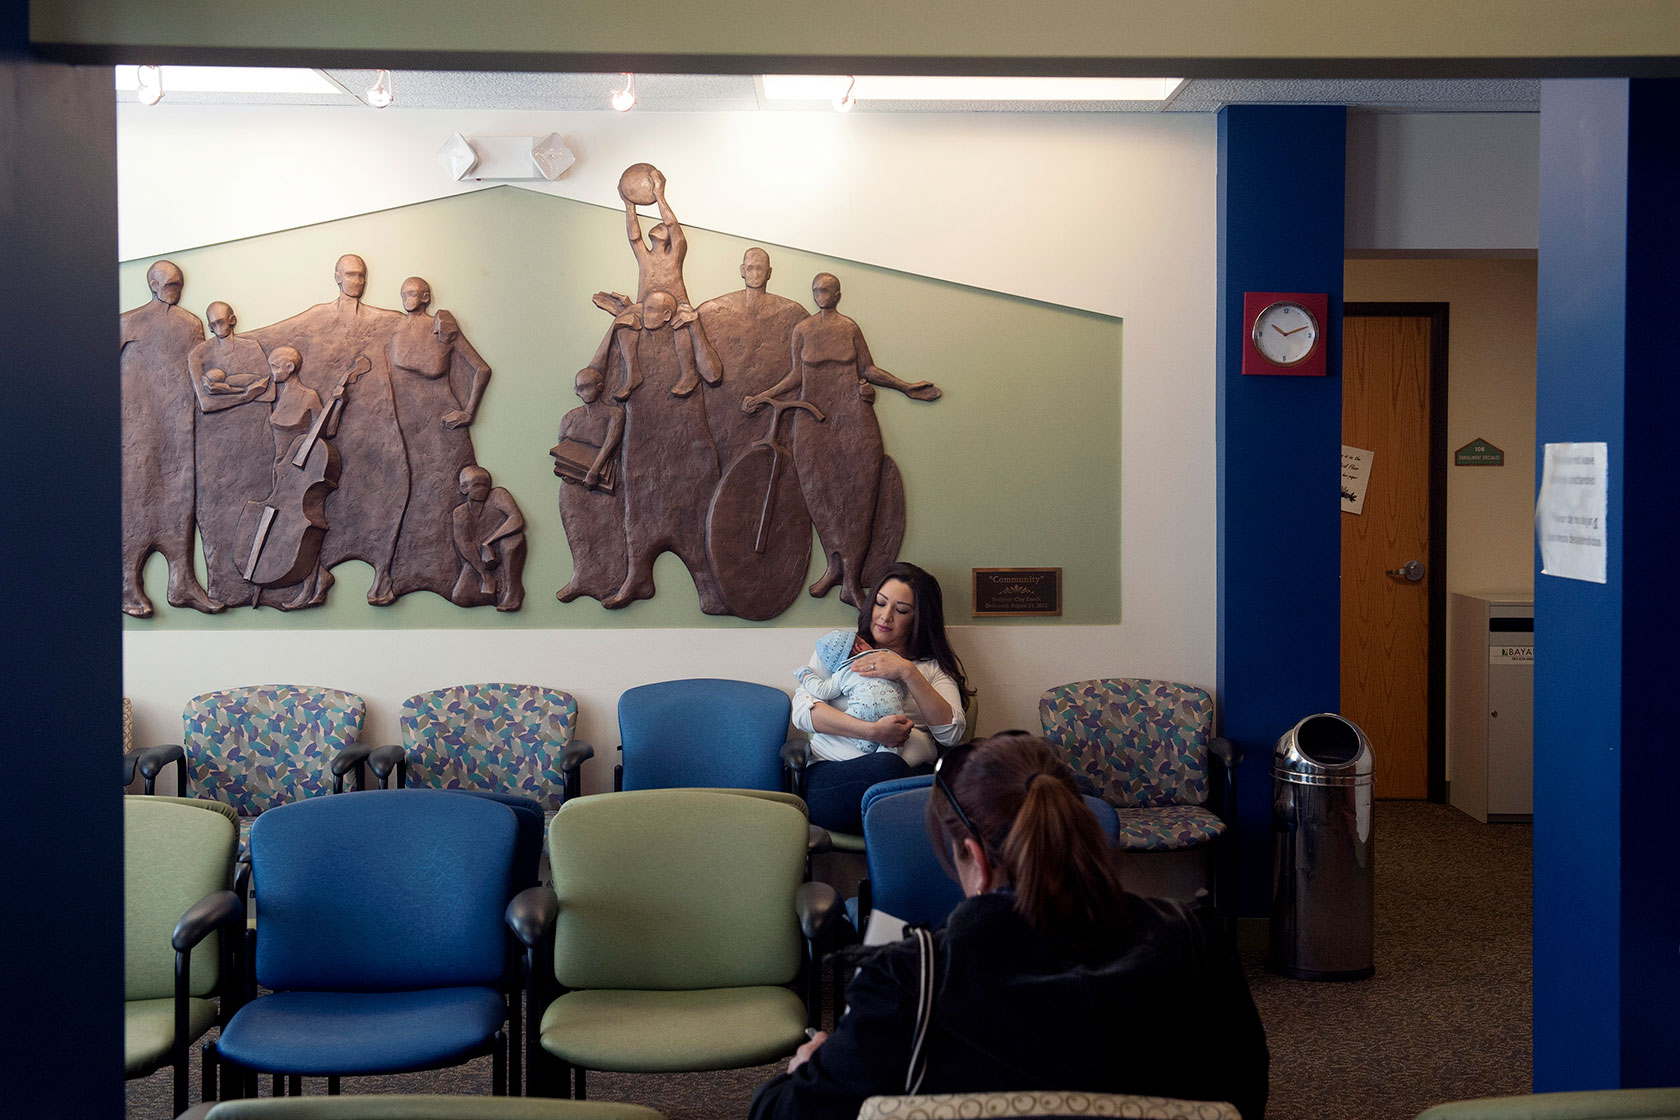 Photo shows a woman holding her young baby in a waiting room, with a mural in the background